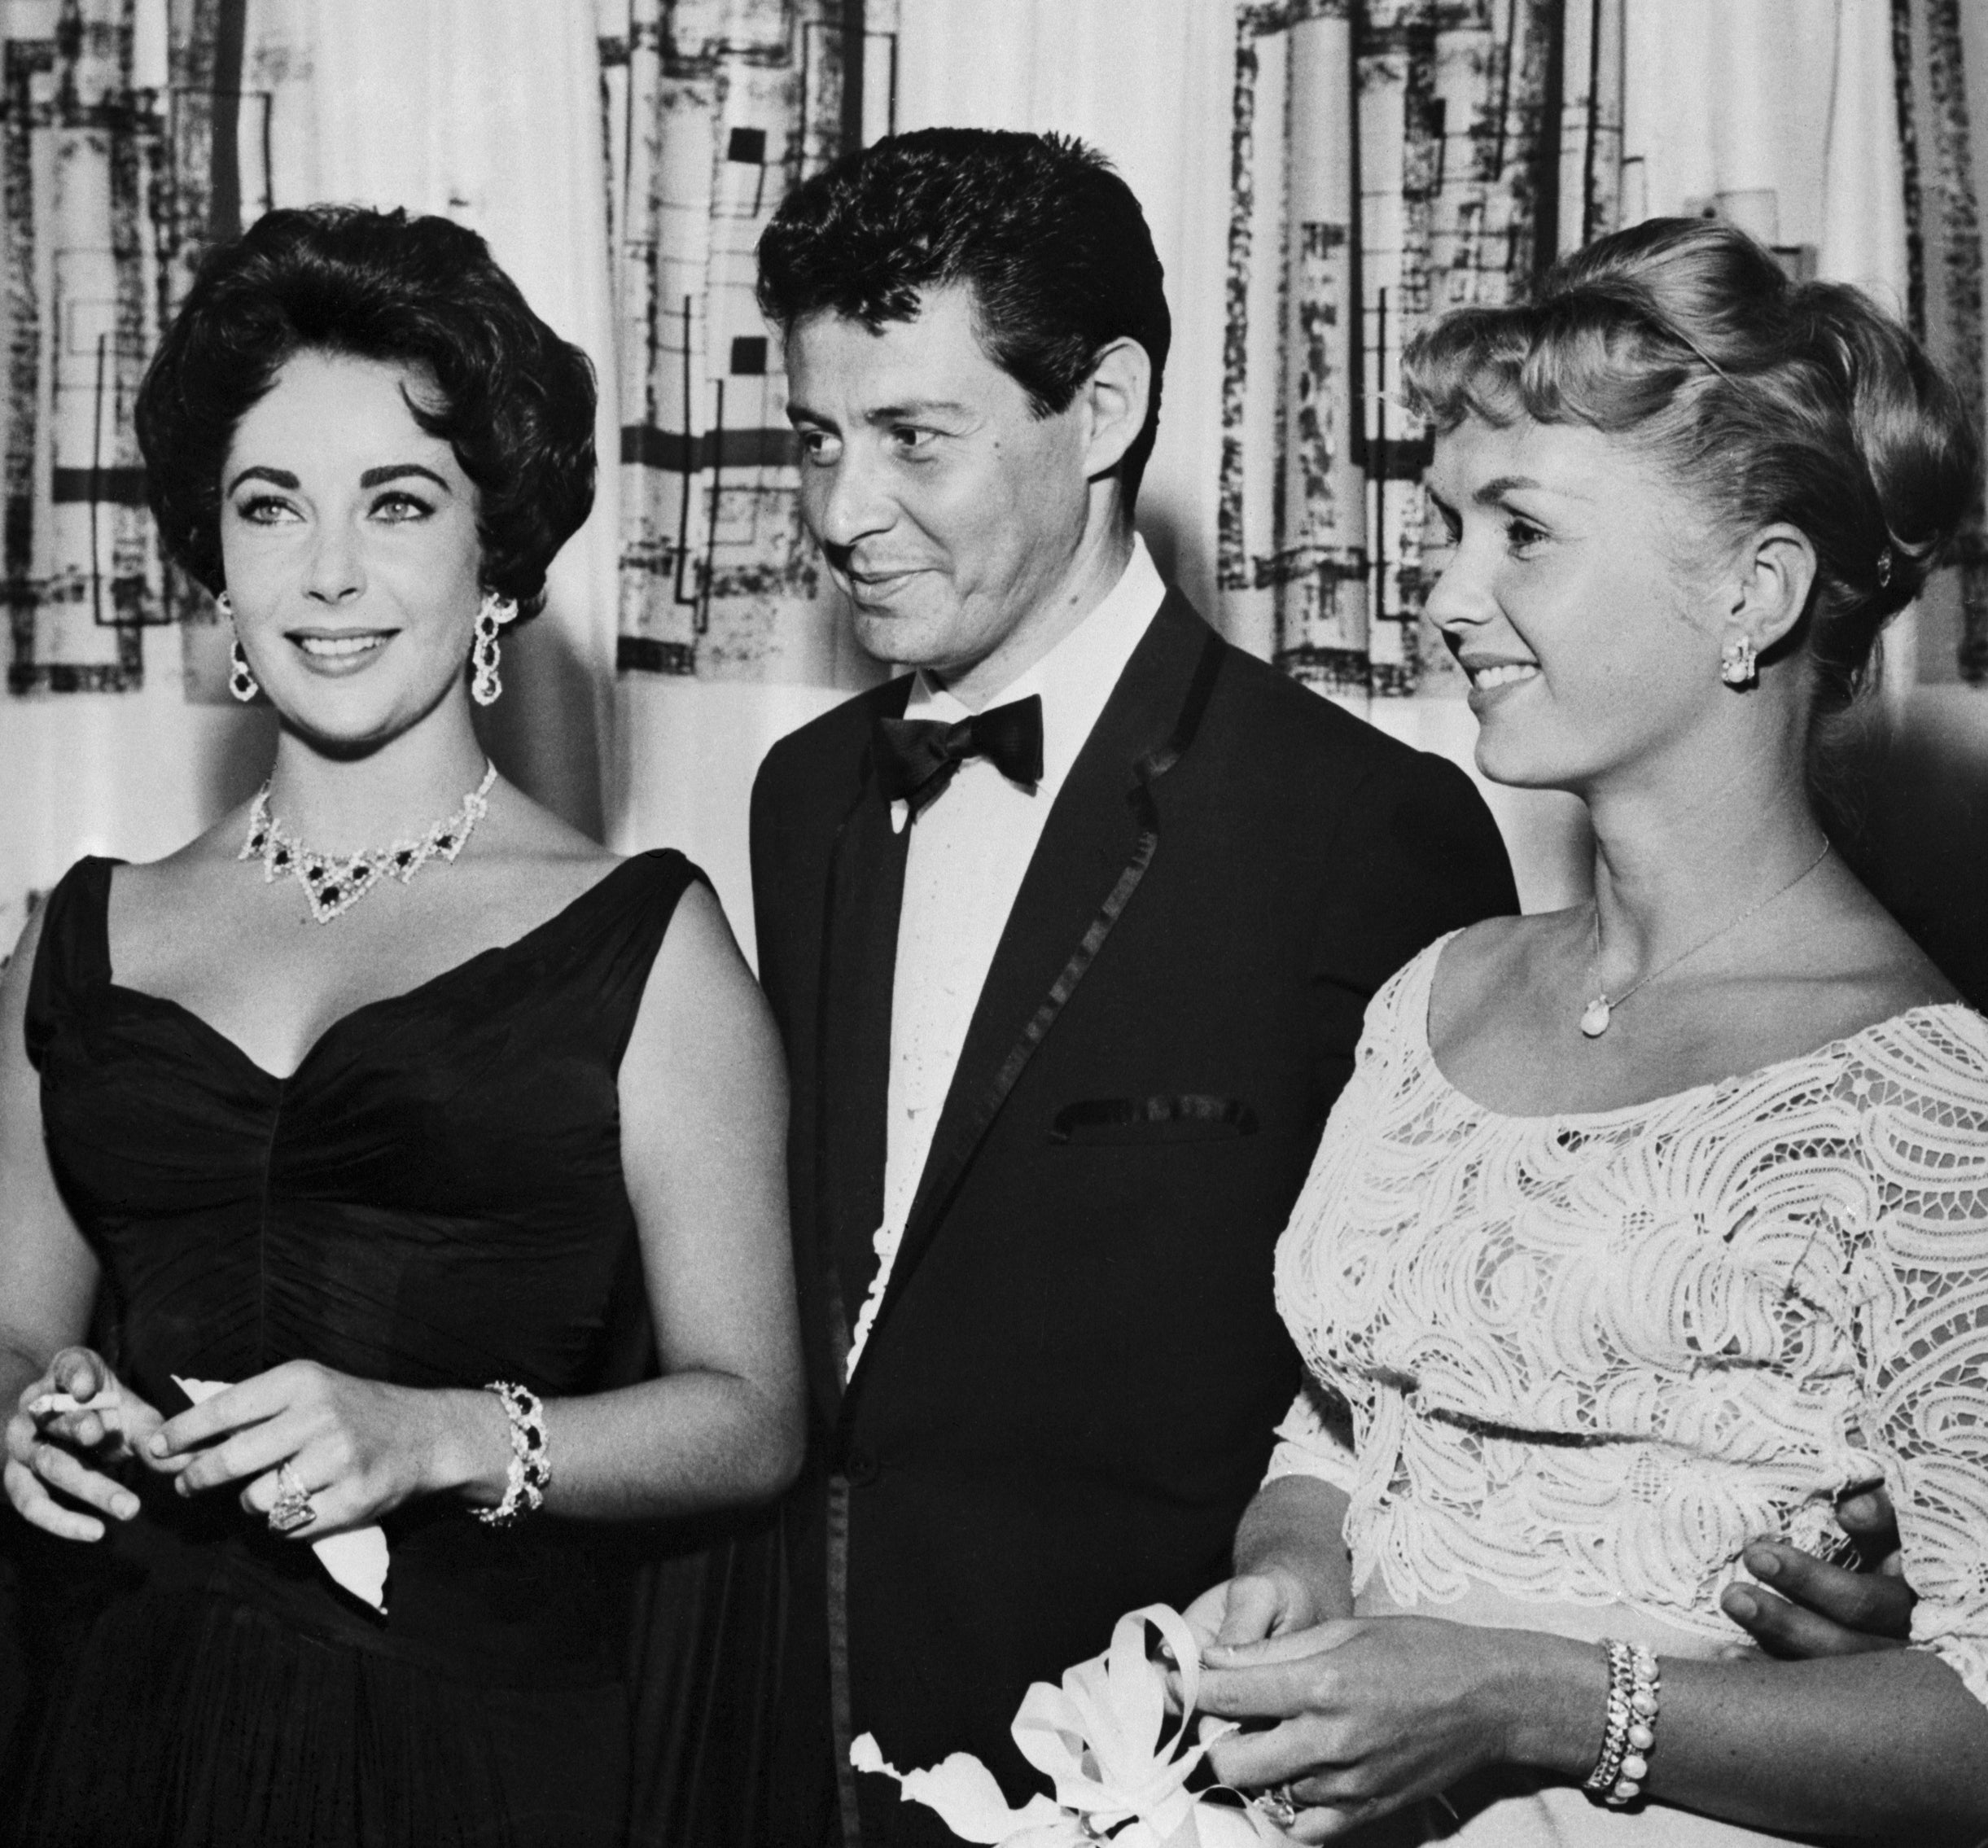 Liz Taylor, Eddie Fisher and Debbie Reynolds celebrated the Tropicana’s opening night together, two years before their love trial set global gossip pages atwitter; following Reynolds granting a quick Nevada divorce, Taylor and Fisher married in Vegas in May 1959 on the same day he gave another Trop performance